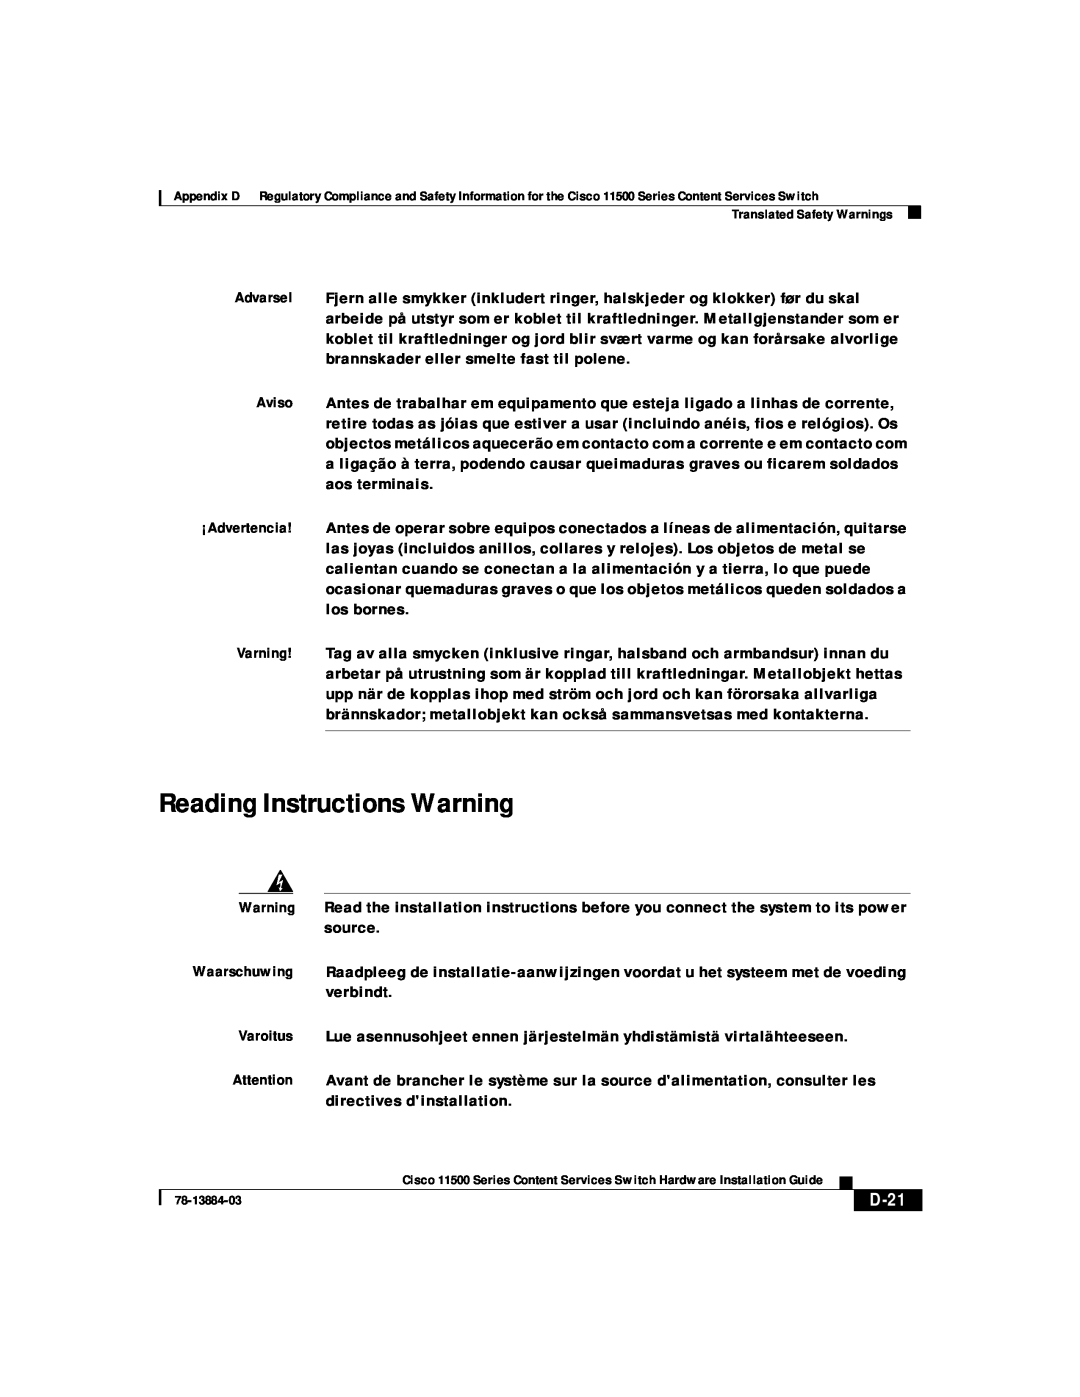 Cisco Systems 11500 Series manual Reading Instructions Warning, D-21 